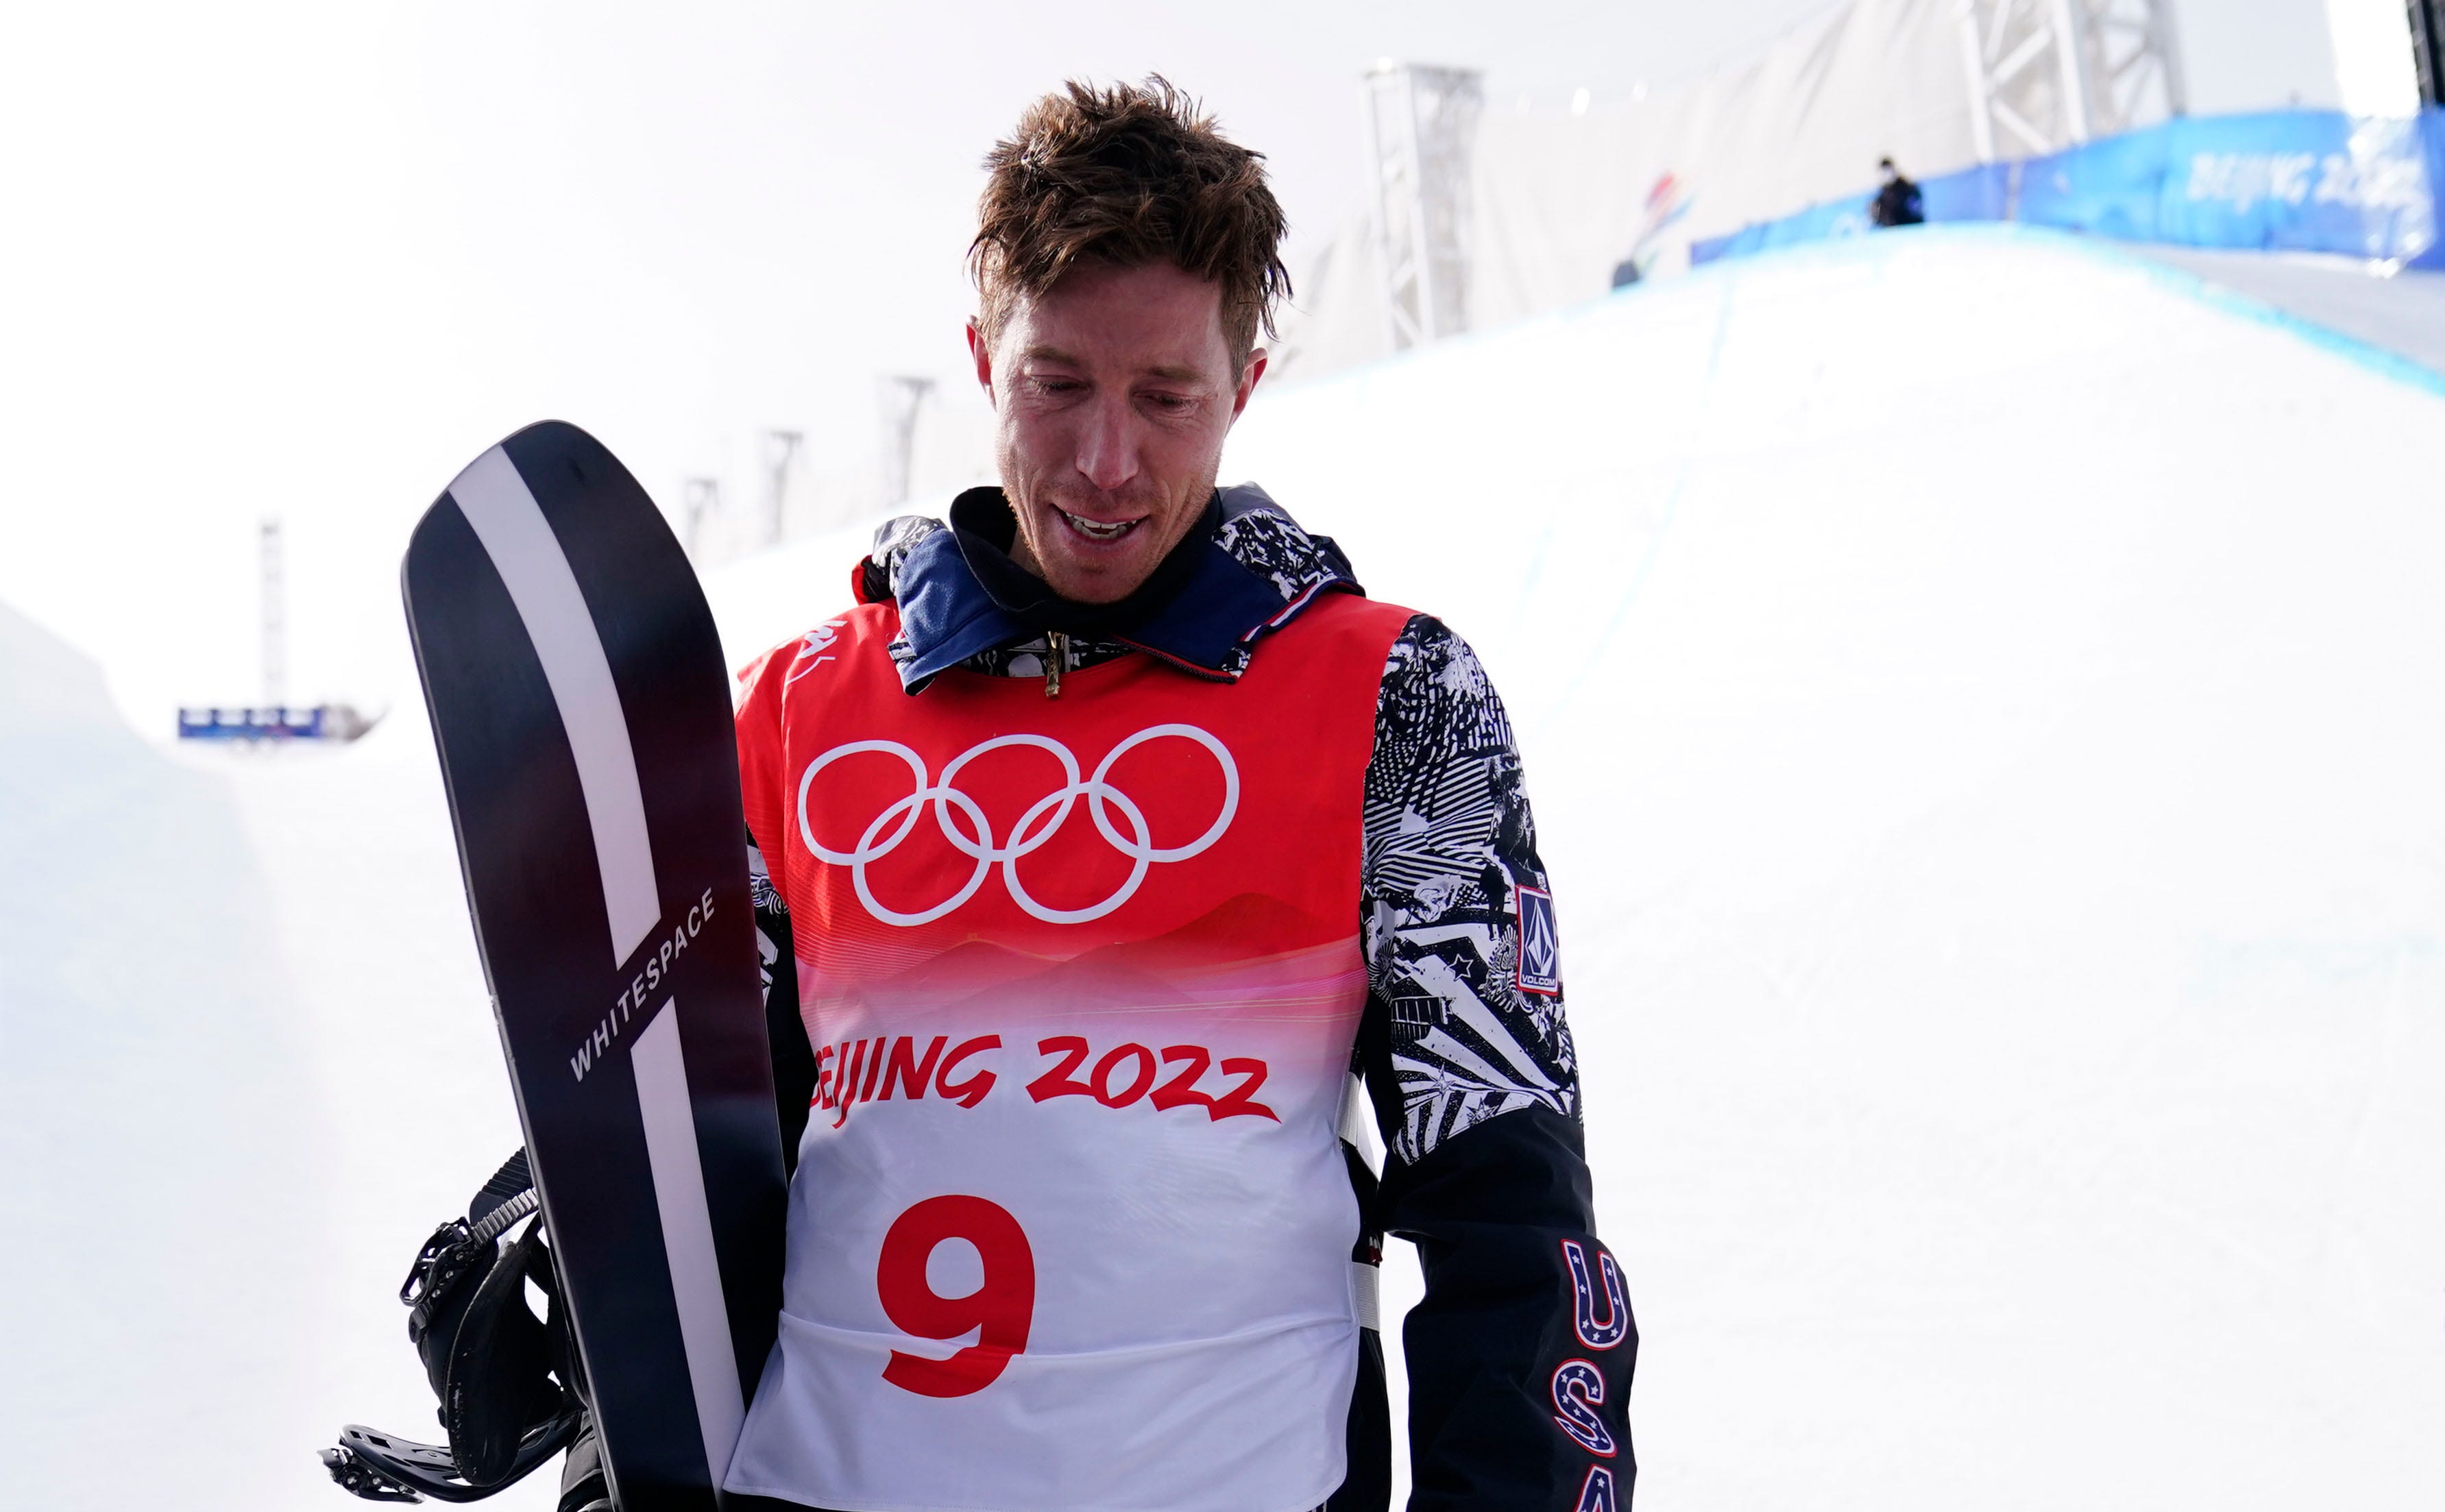 Shaun White tells the story two changed